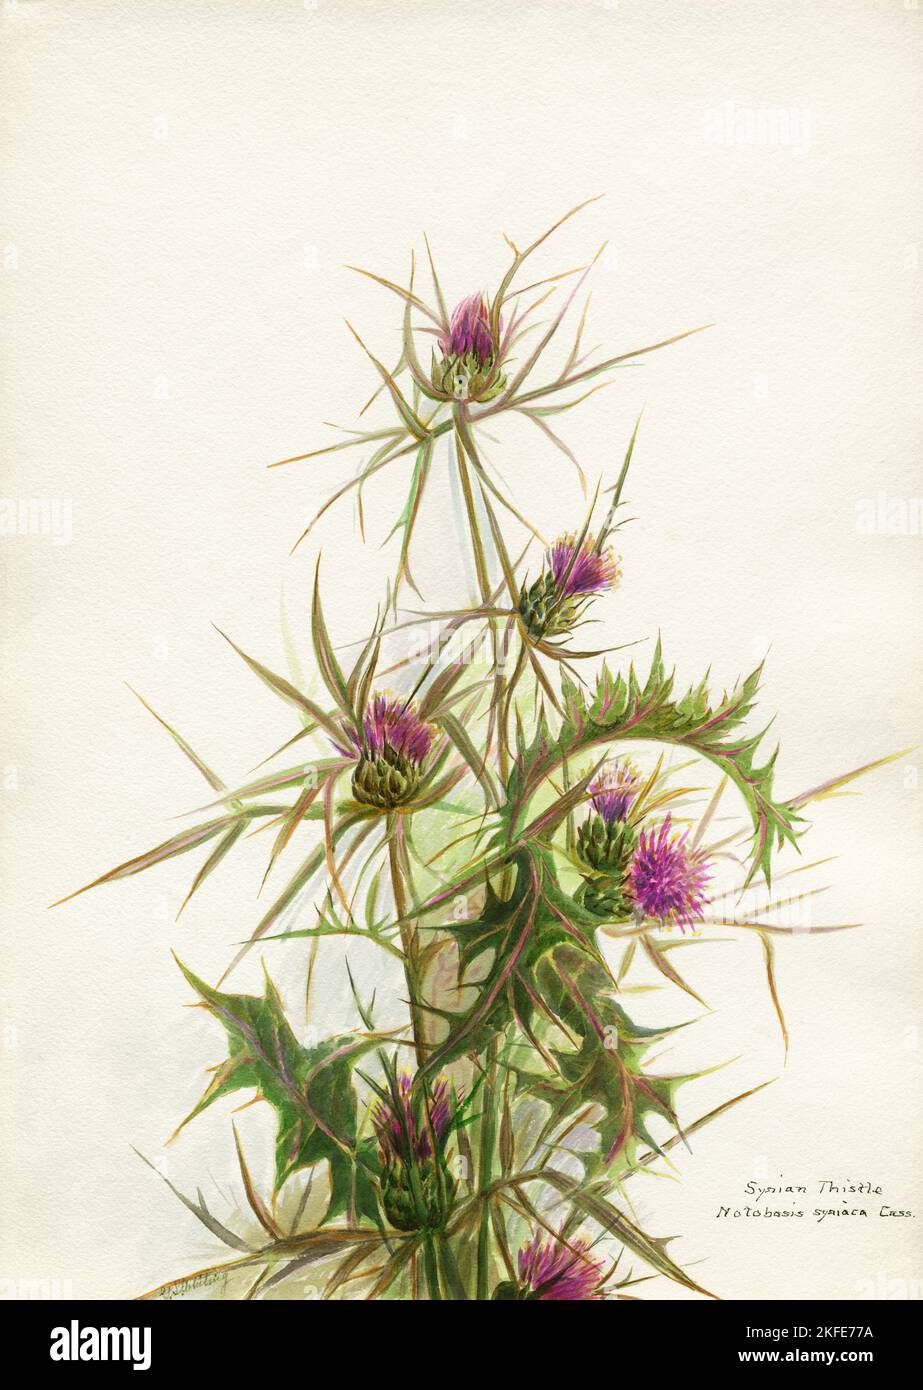 Syrian thistle, Notobasis syriaca cass - Whiting, Grace Spafford artwork 1933 Stock Photo